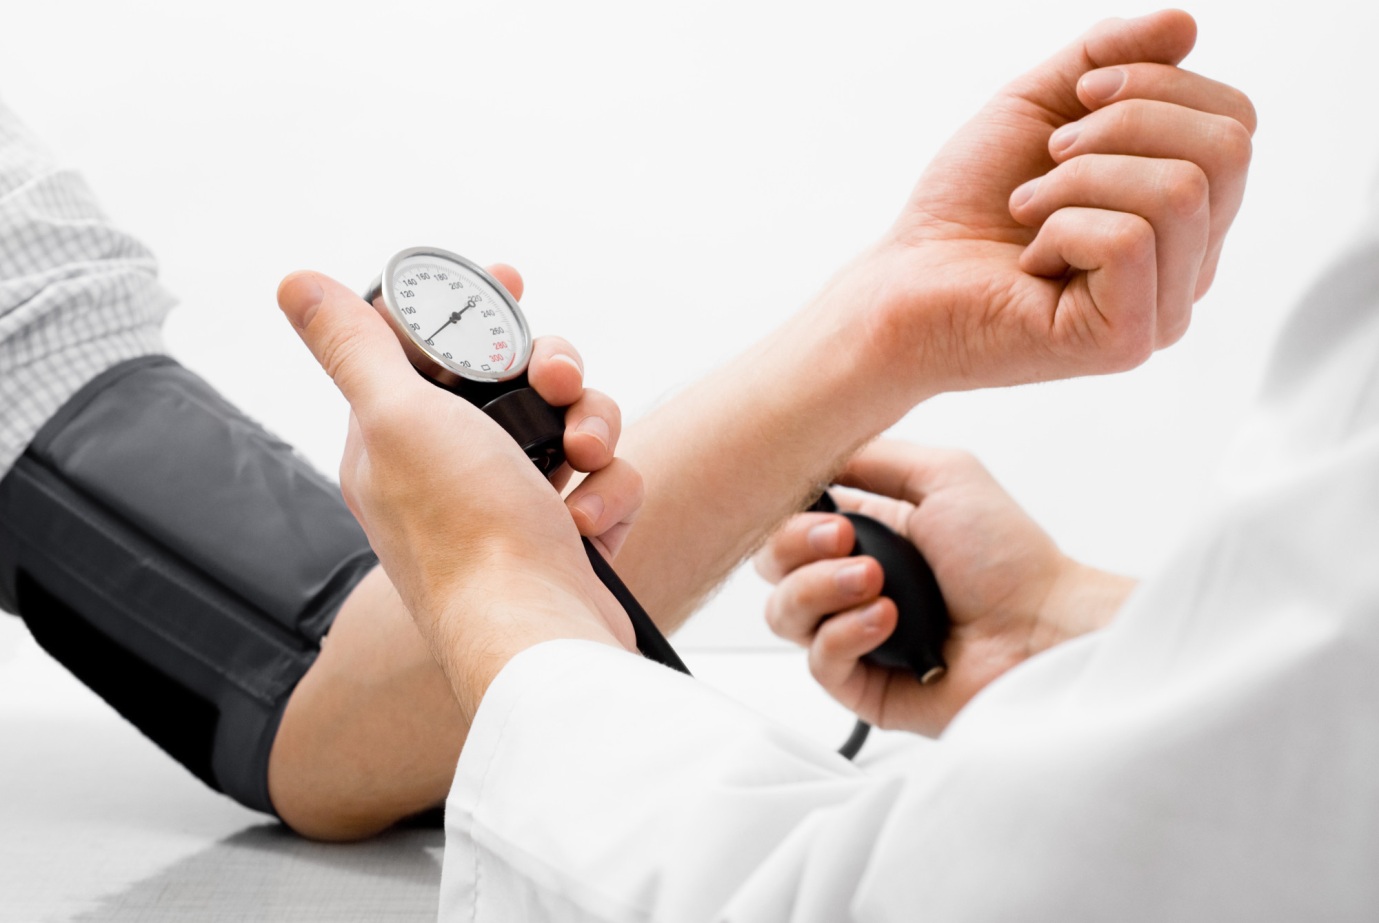 Health Issues: How to Control High Blood Pressure